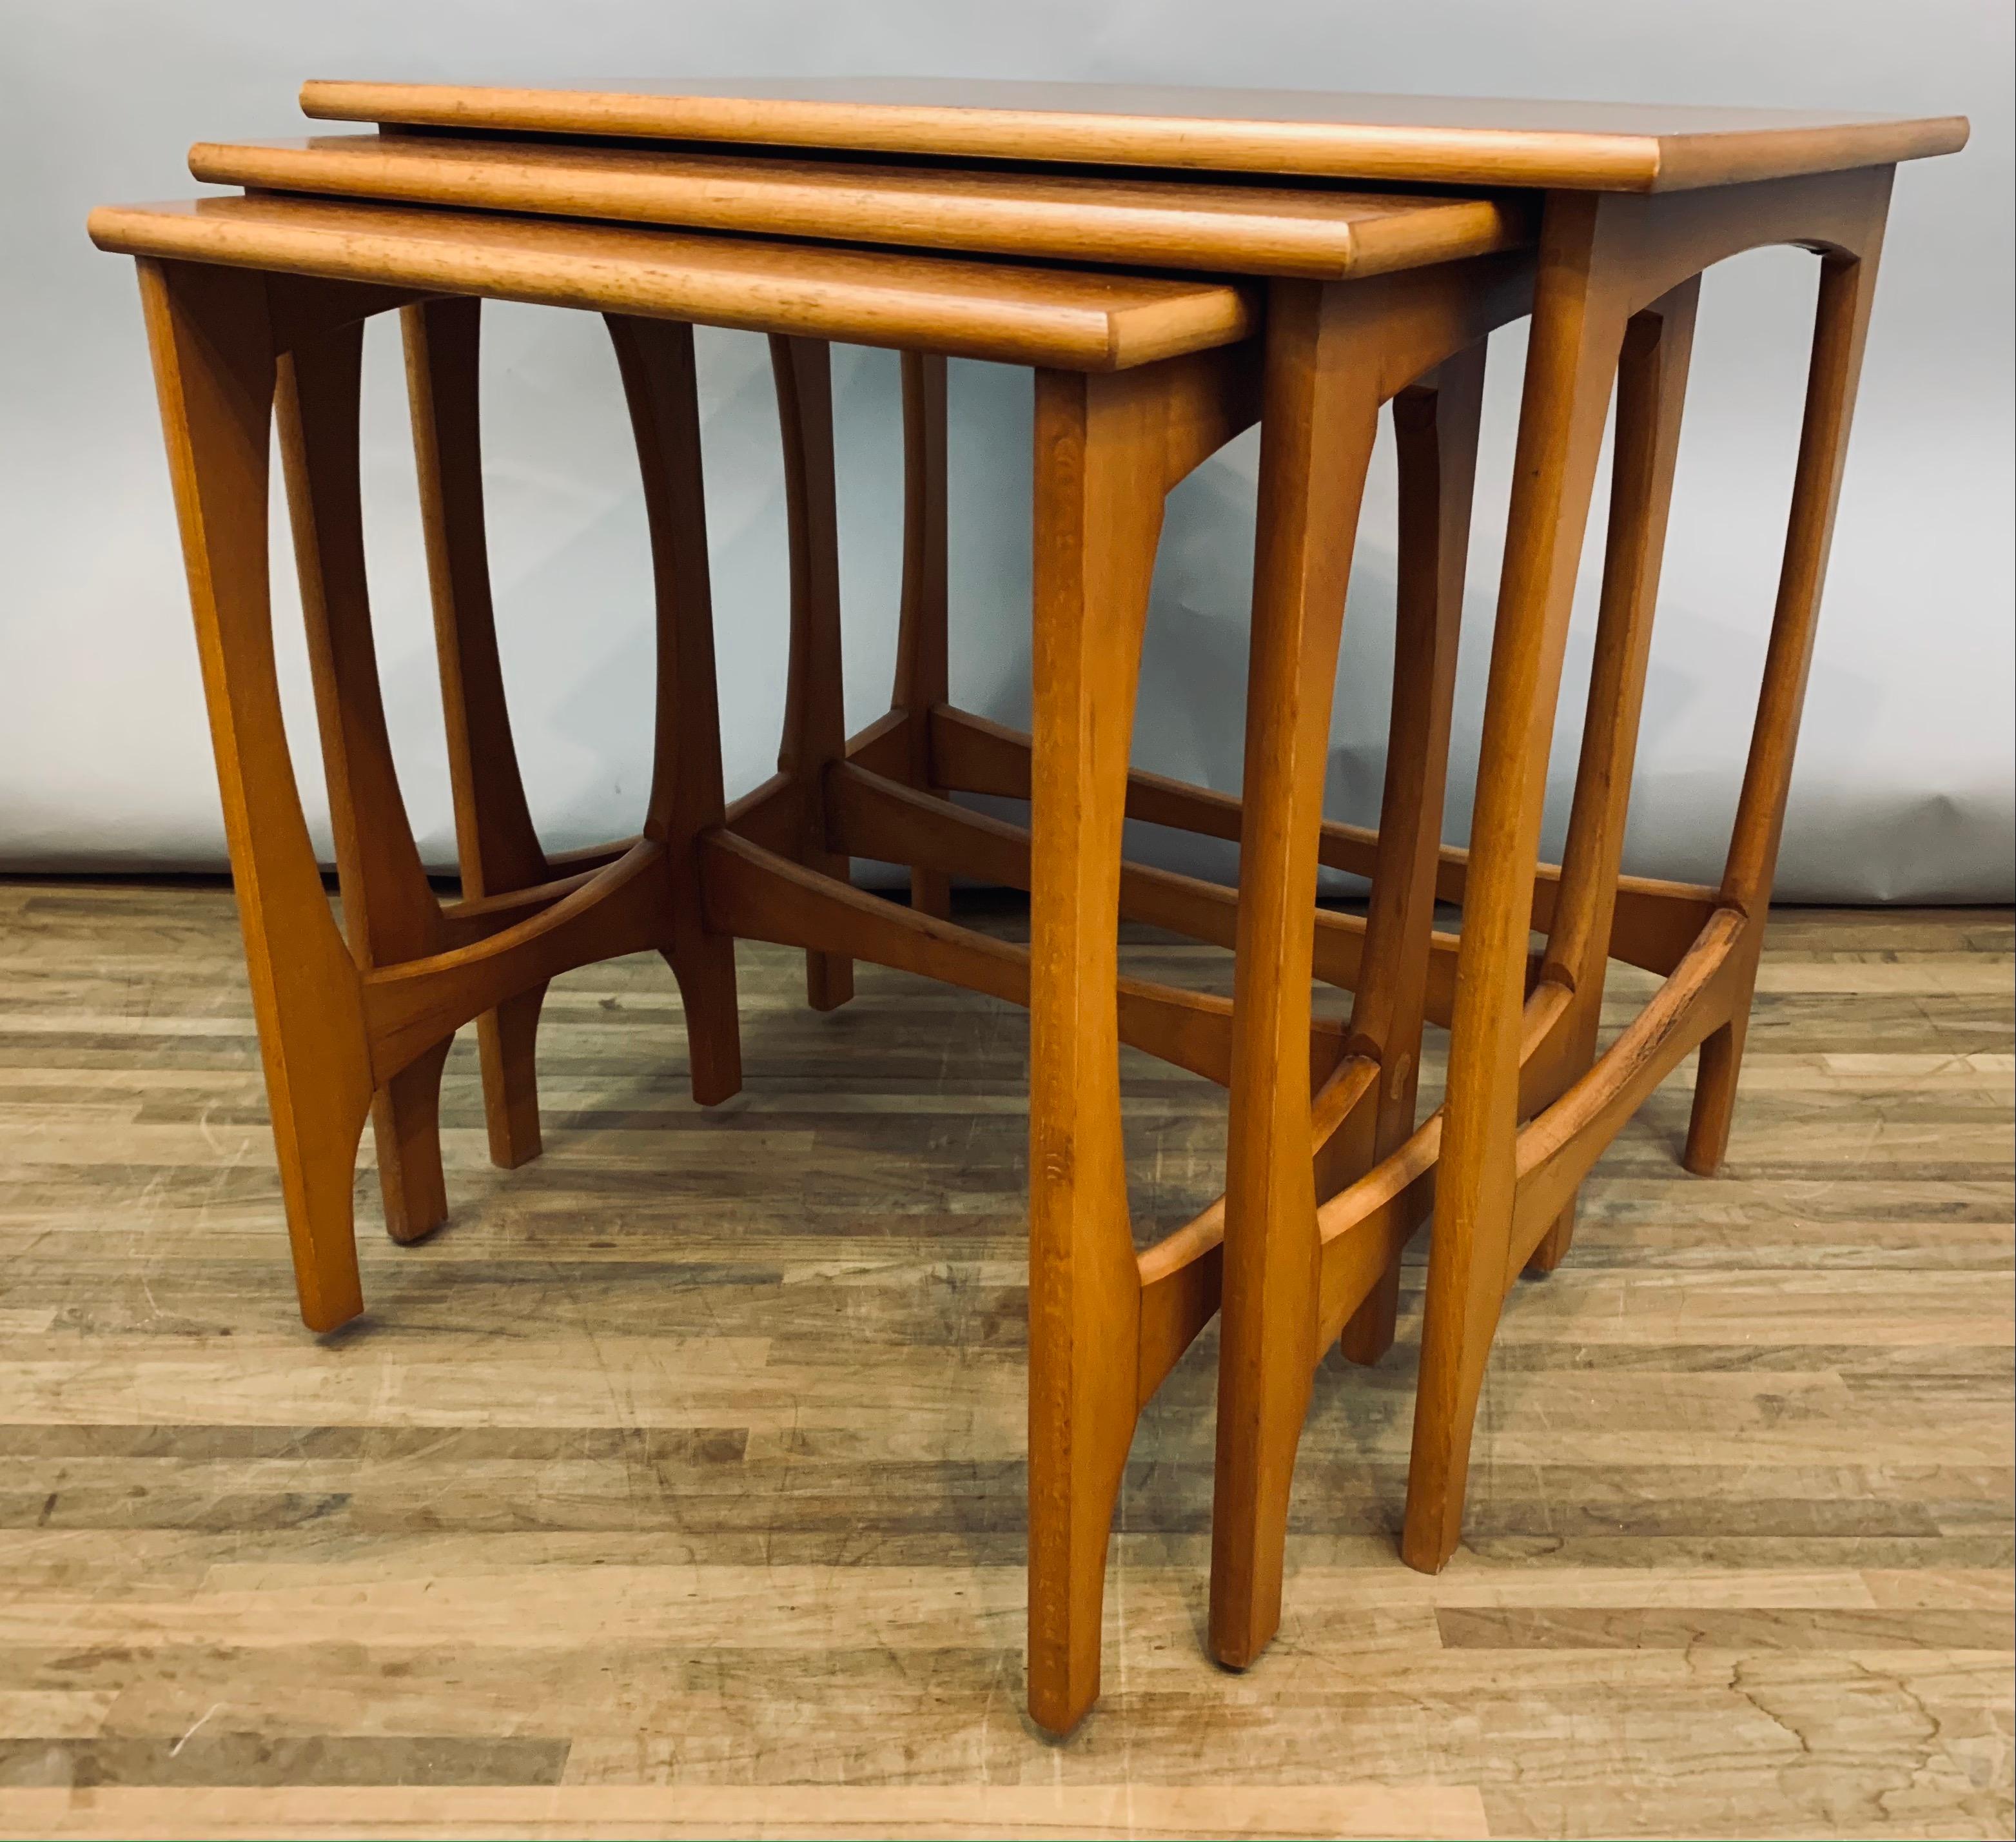 Set of 3, 1960s, nest of teak stackable tables. Made in England. Well-made, sturdy and fully functional. The tables have a wonderful deep and even grain. The tables are designed to slot into one other when not in use and for storage purposes. The